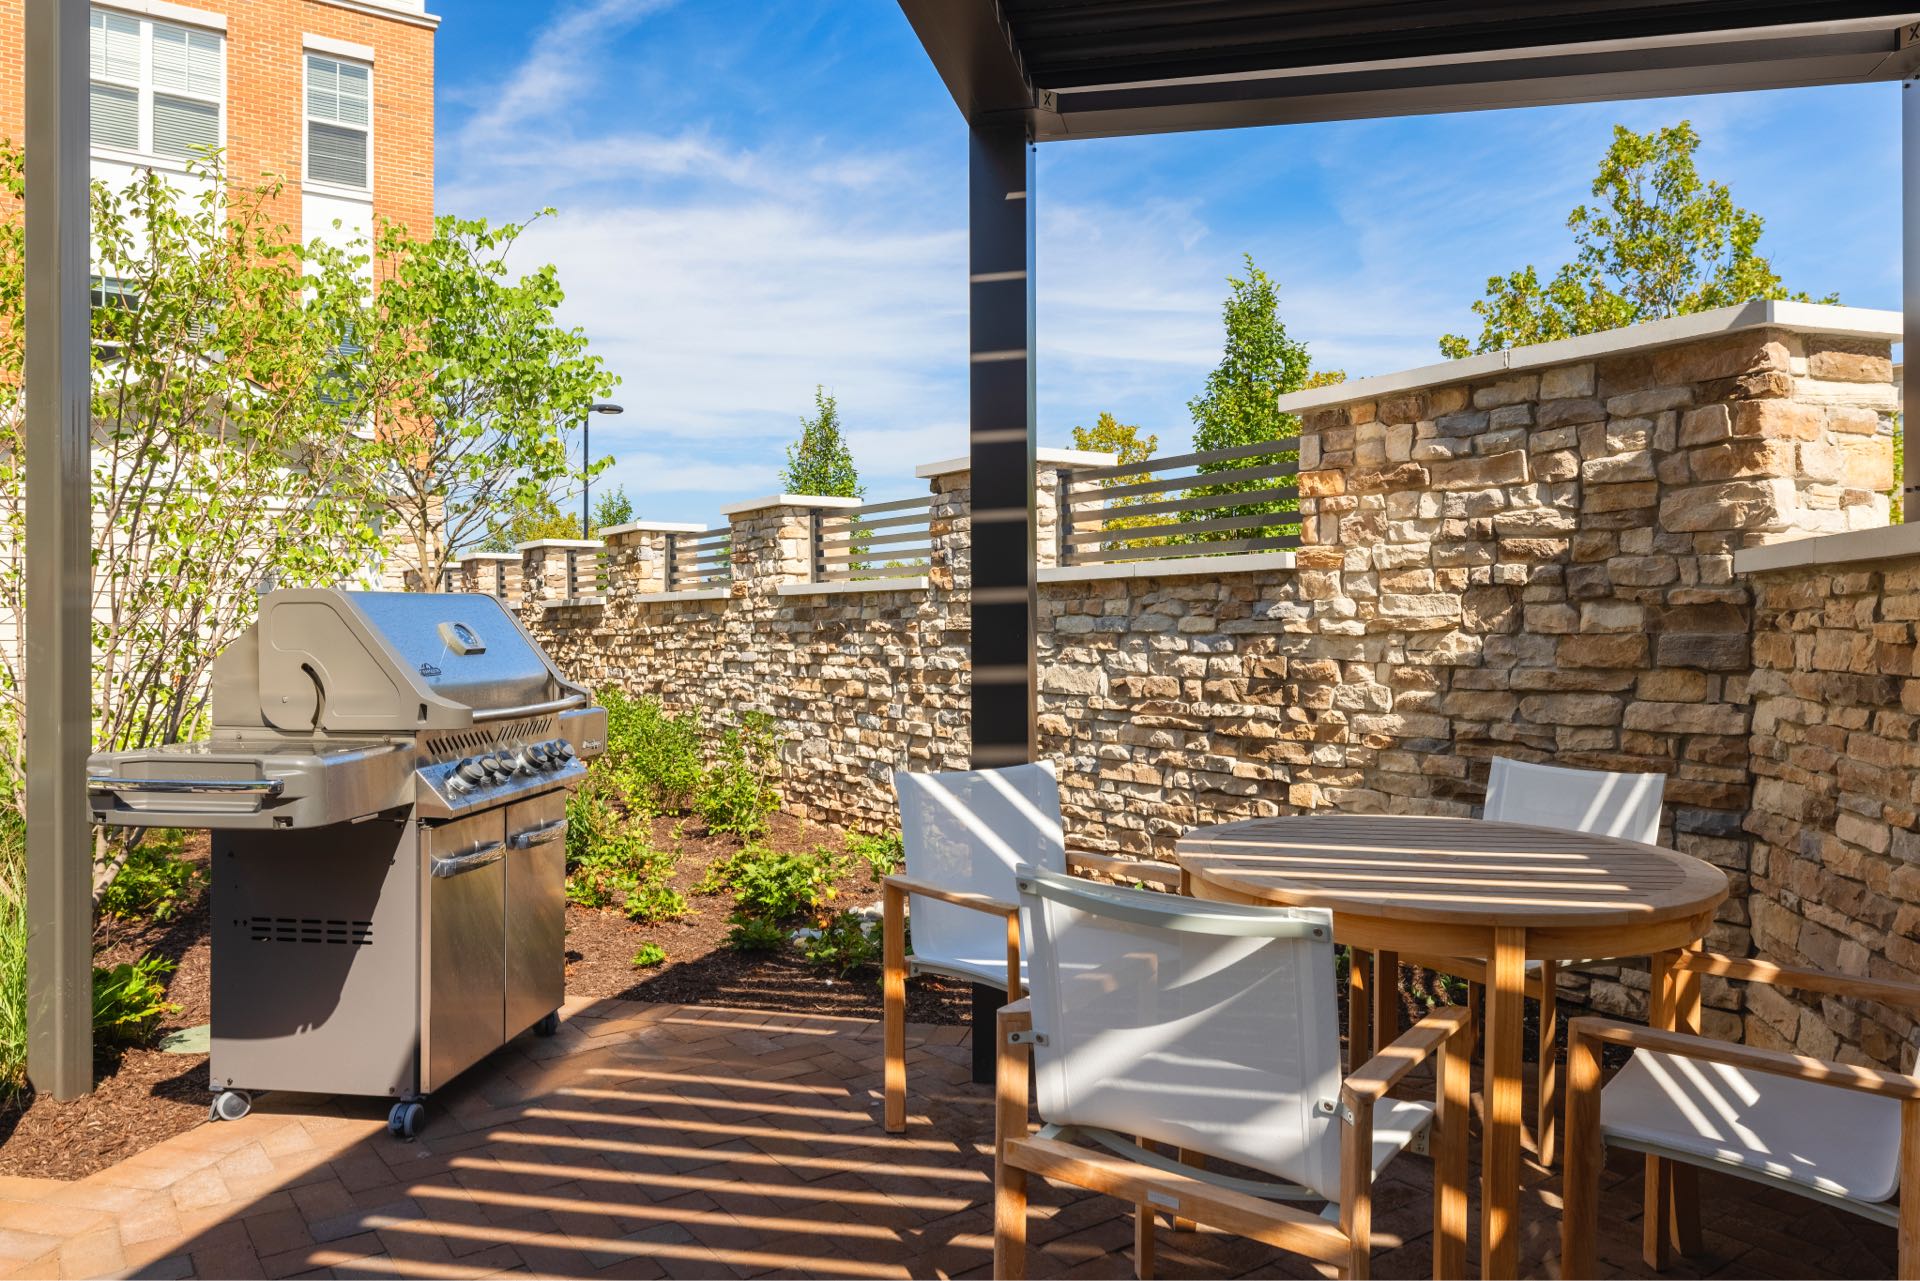 One Courtyard Grill